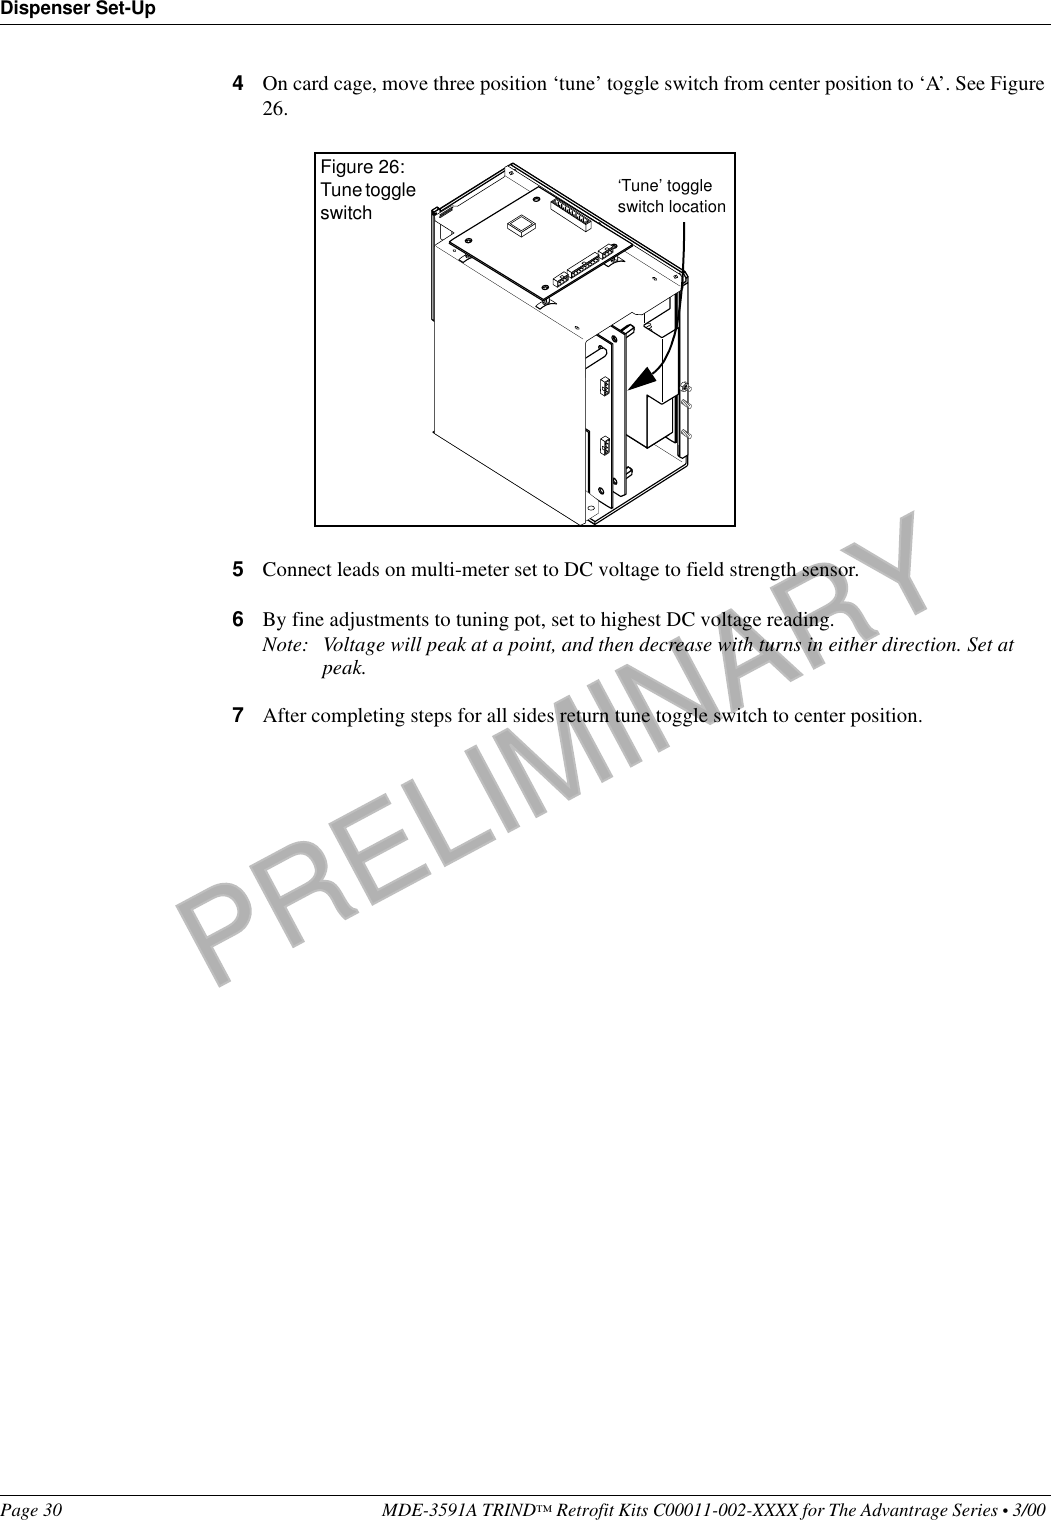 PRELIMINARYDispenser Set-UpPage 30 MDE-3591A TRIND™ Retrofit Kits C00011-002-XXXX for The Advantrage Series • 3/00 4On card cage, move three position ‘tune’ toggle switch from center position to ‘A’. See Figure 26.5Connect leads on multi-meter set to DC voltage to field strength sensor.6By fine adjustments to tuning pot, set to highest DC voltage reading.Note: Voltage will peak at a point, and then decrease with turns in either direction. Set at peak.7After completing steps for all sides return tune toggle switch to center position.‘Tune’ toggle switch locationFigure 26:Tune toggle switch